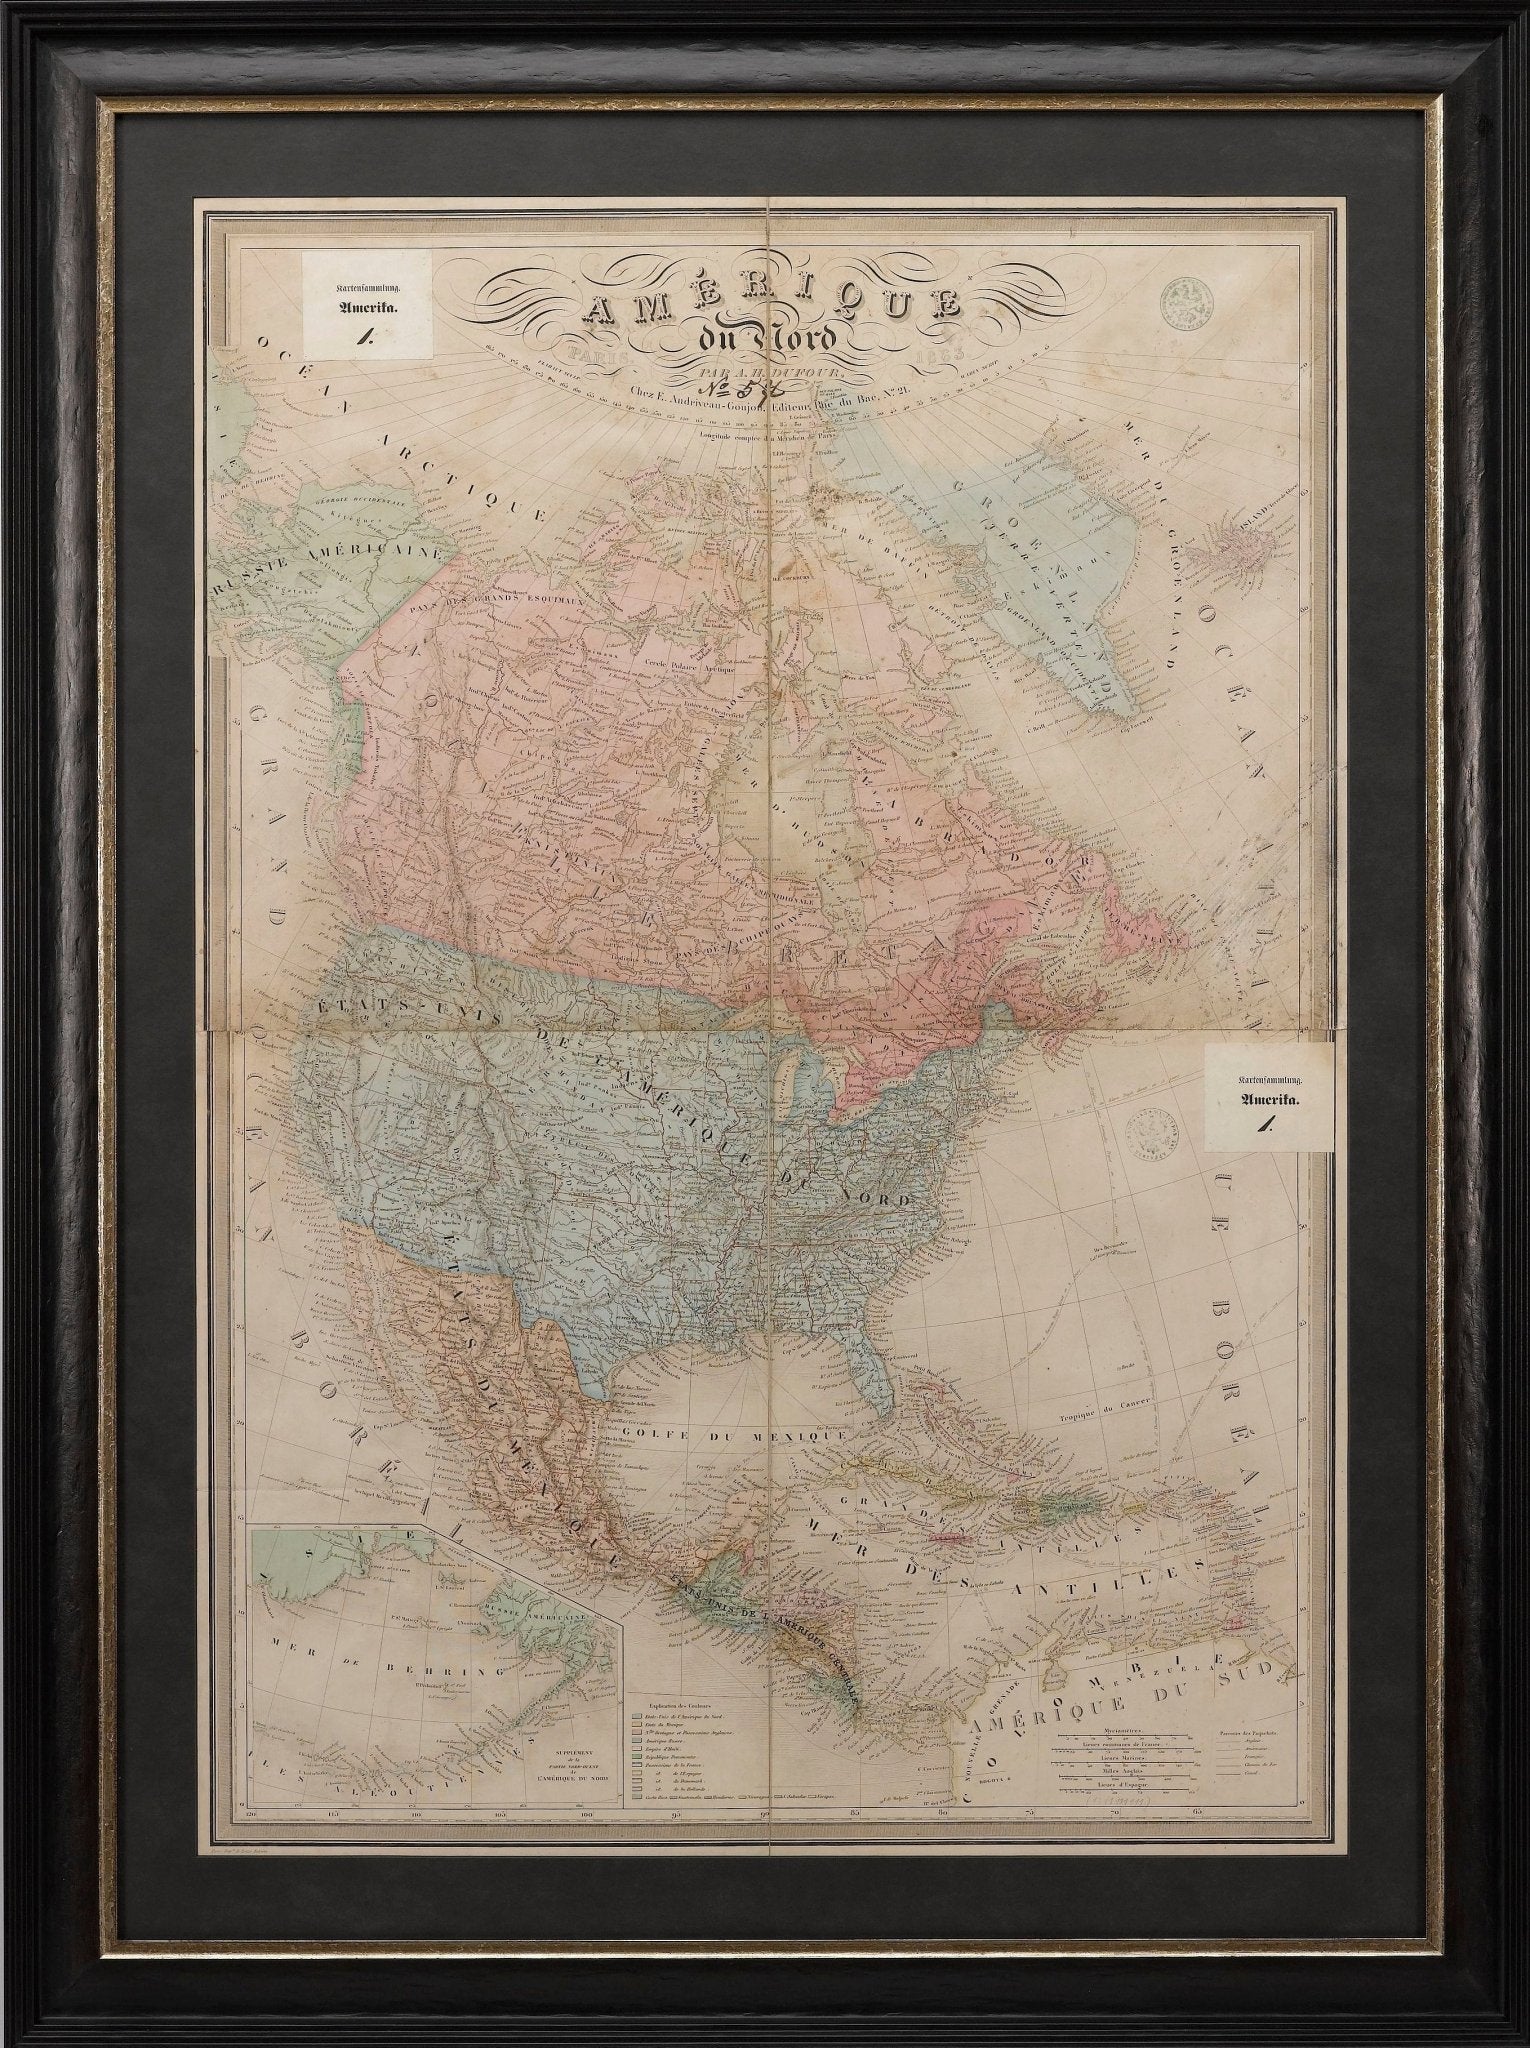 1864 "Amerique du Nord" by Adolphe Hippolyte Dufour - The Great Republic